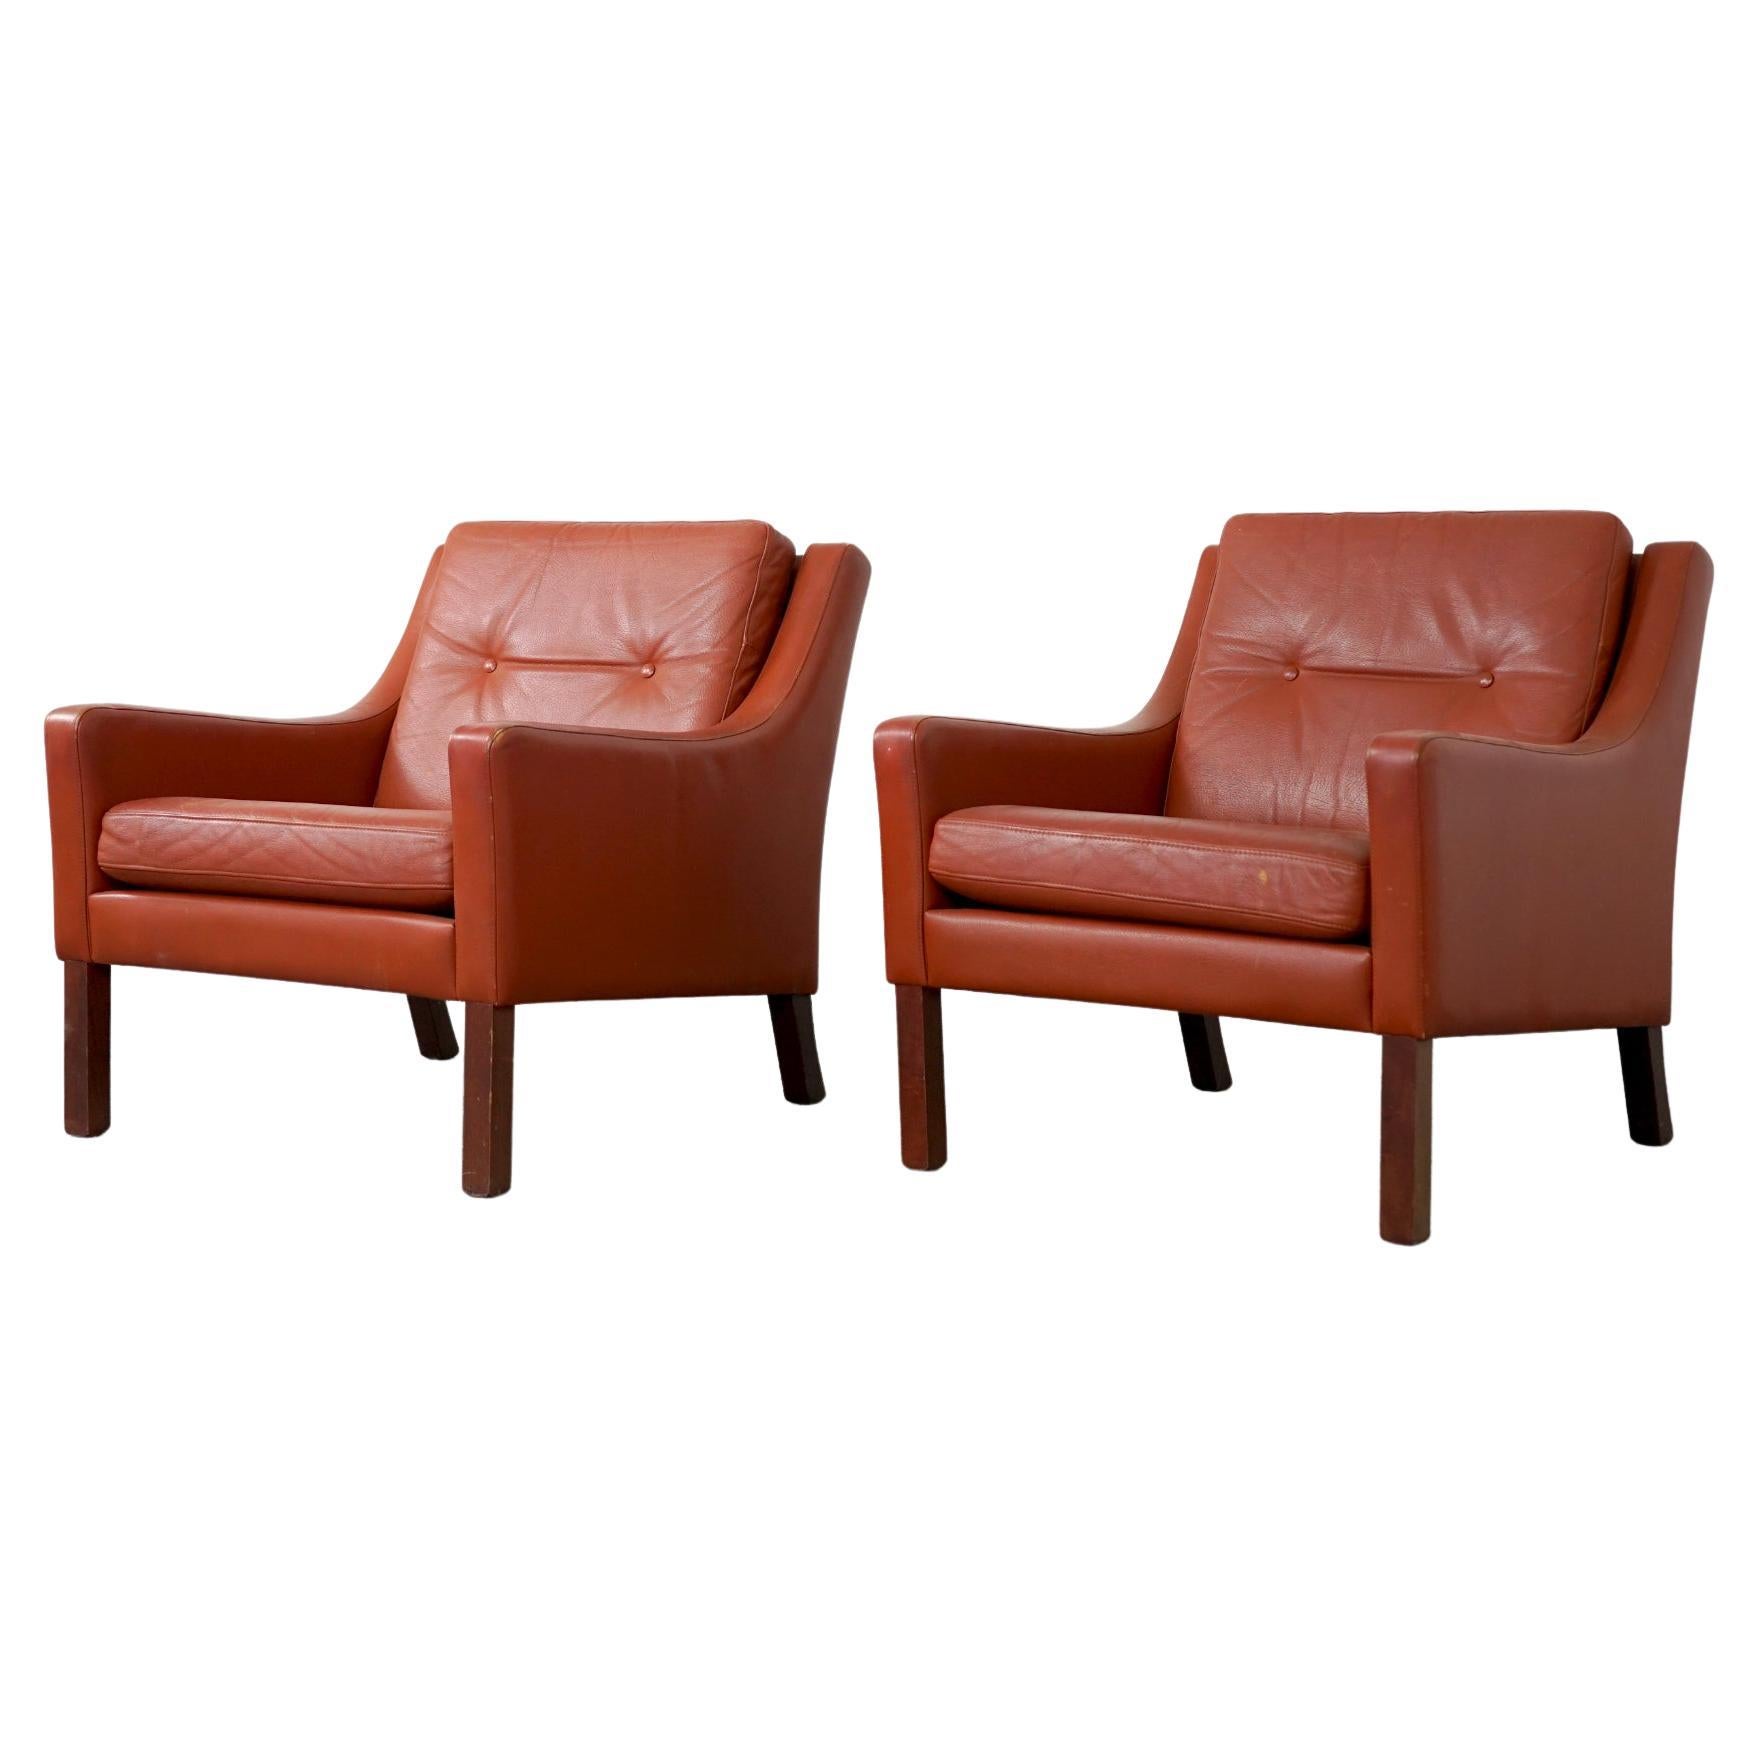 Pair of Danish Mid-Century Modern Tufted Leather Loungers